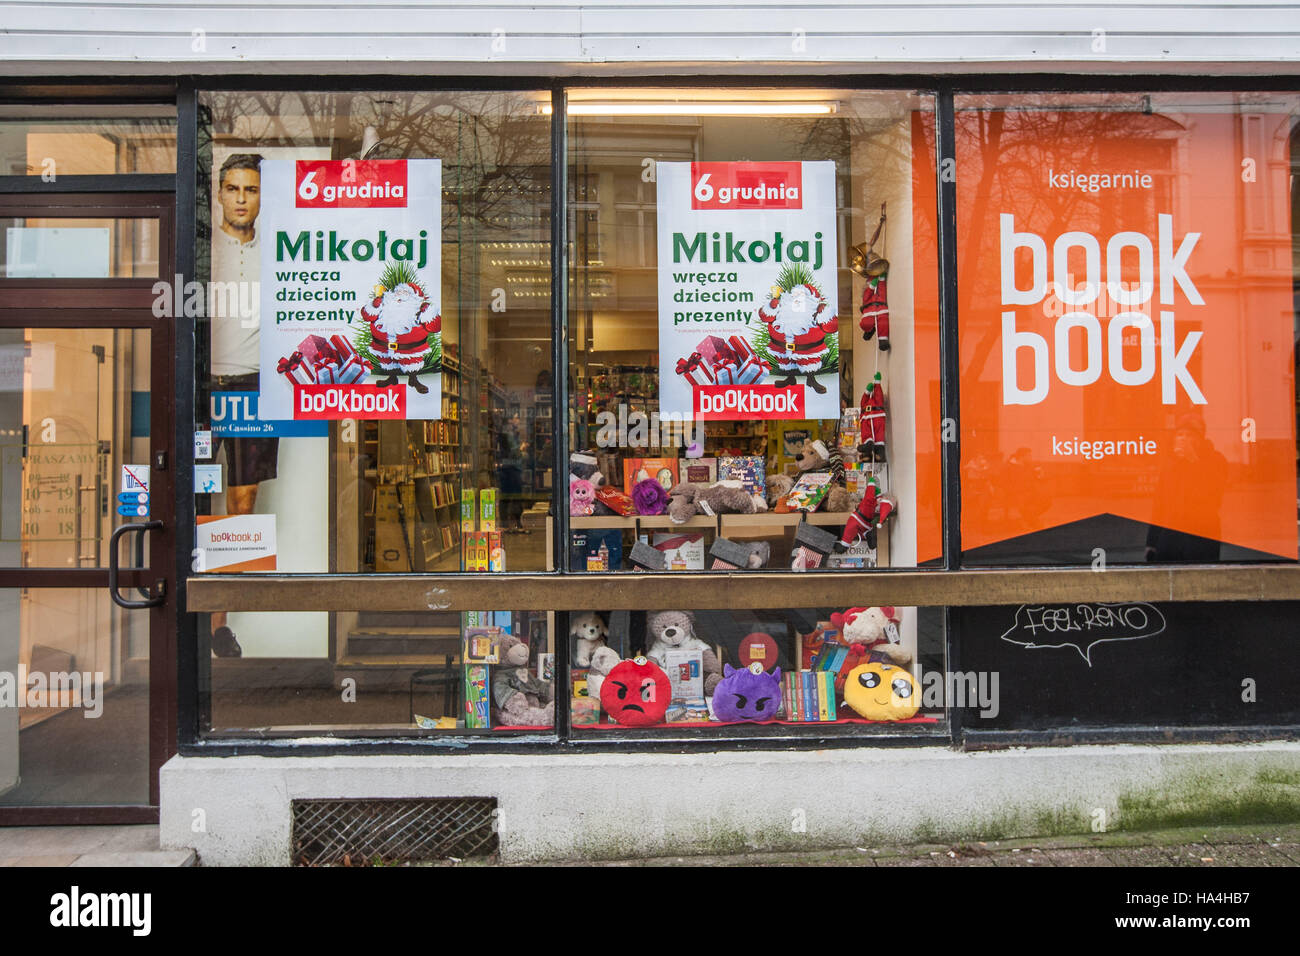 Sopot, Poland 27 November 2016 Cold day in Sopot. Book Book bookstore decorated on Christmas seazon is seen. Meteorologists predict high snow fall in nex few hours. Credit:  Michal Fludra/Alamy Live News Stock Photo